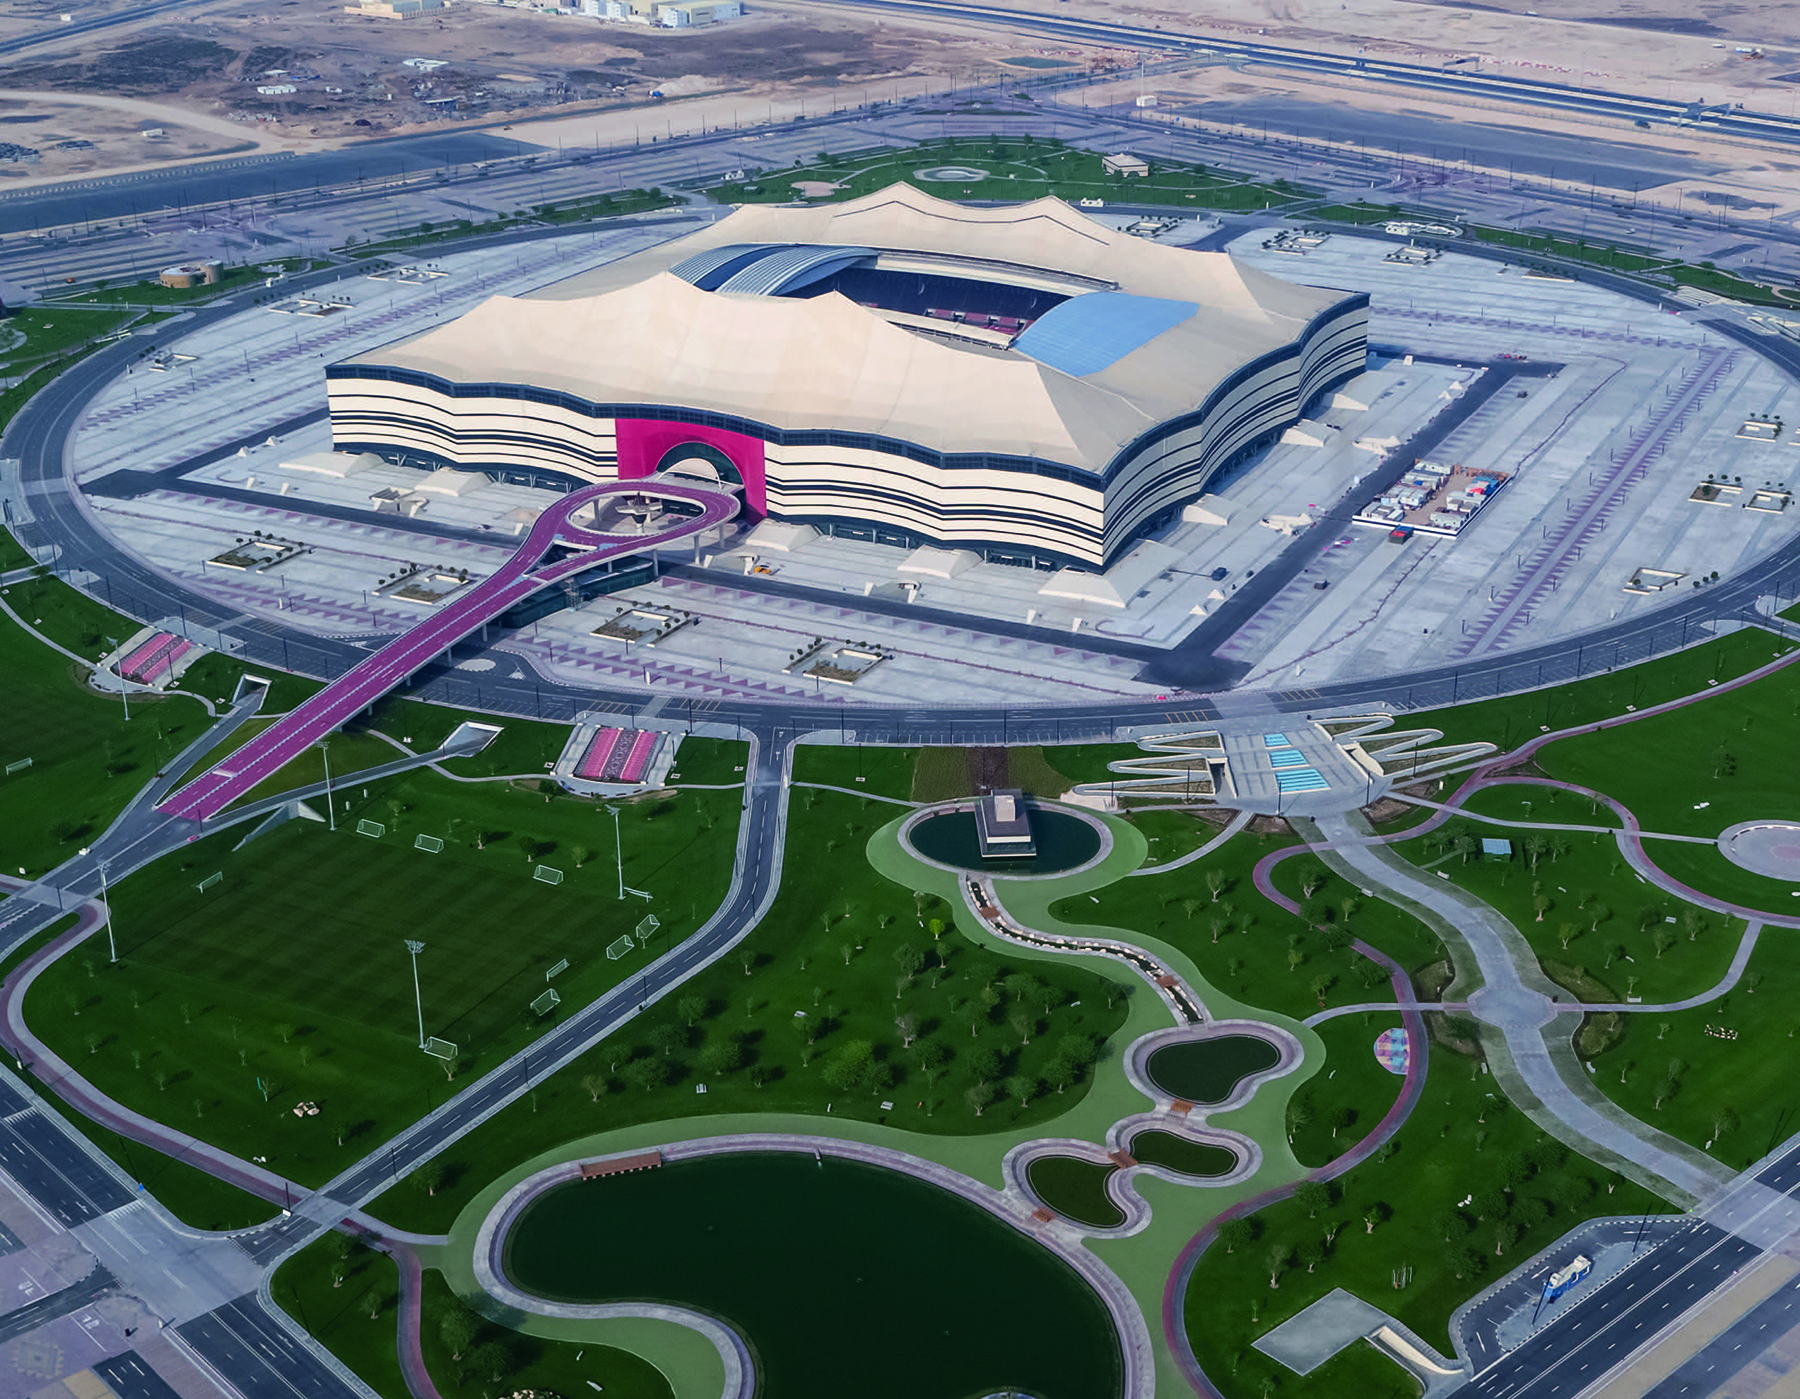 Al Bayt Stadium (Image courtesy of the Supreme Committee for Legacy and Delivery)